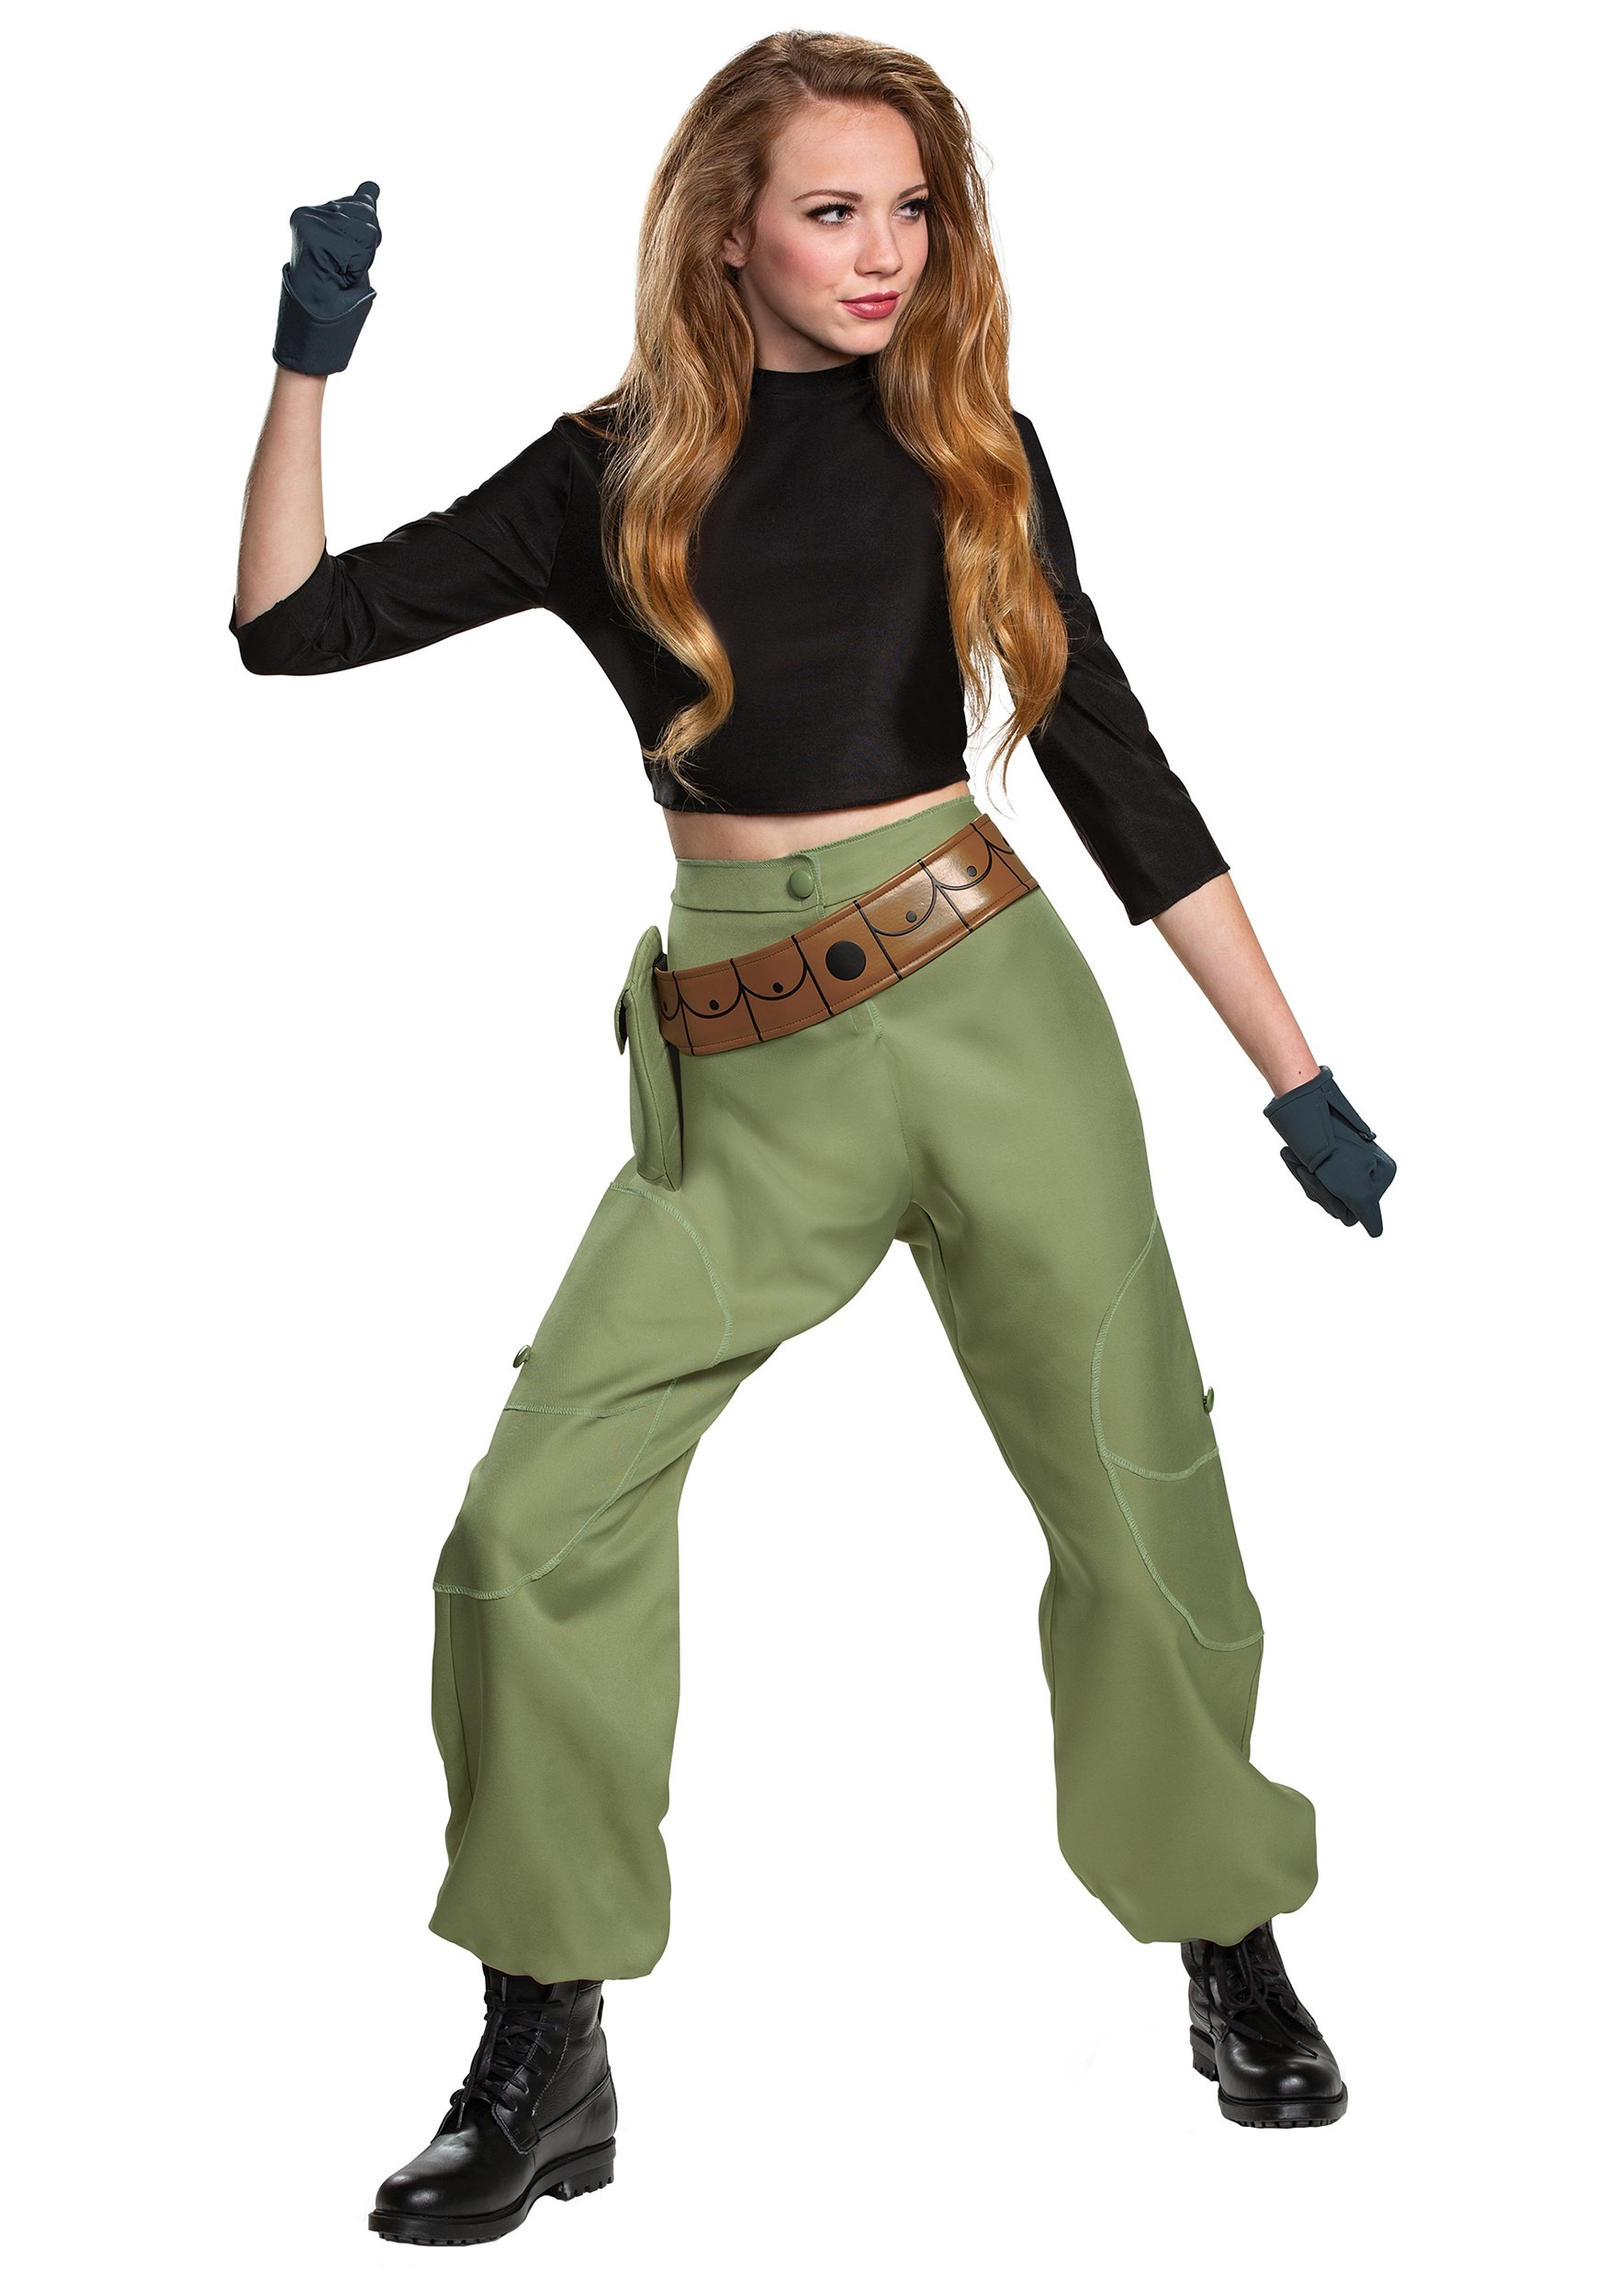 Kim Possible Animated Series Kim Possible Costume for Women